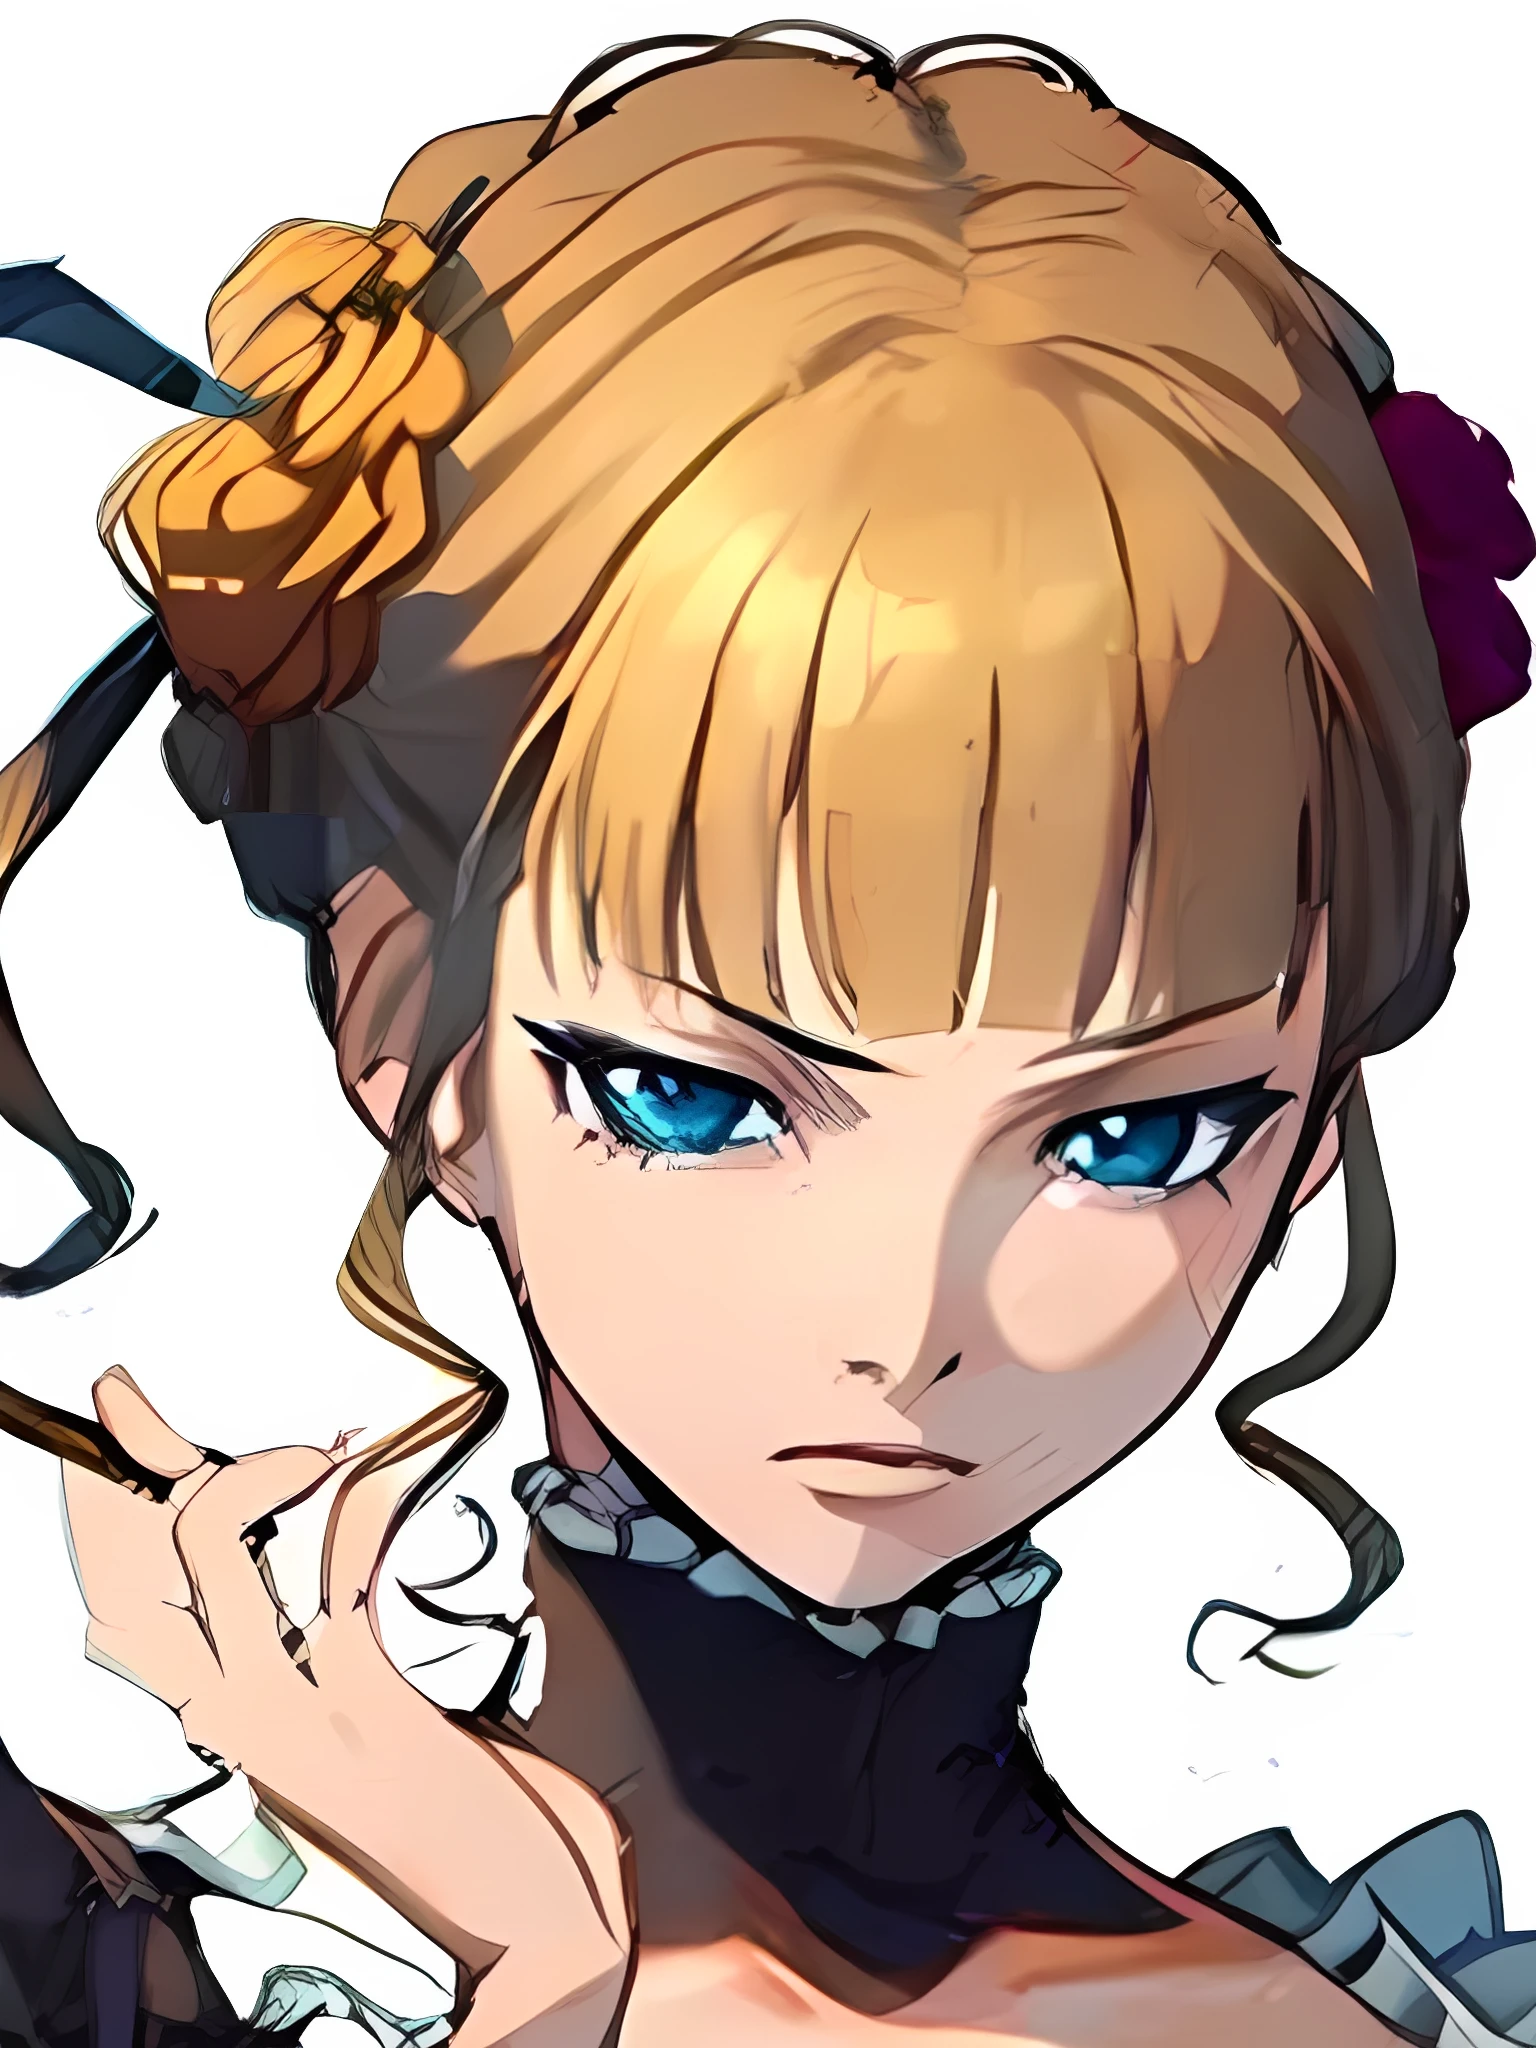 Beatrice、Golden Witch、One Woman、Umineko no Naku ni ni、highest quality、RAW Photos、8k、Noble figure、With kissel、Hair is tied up on top、